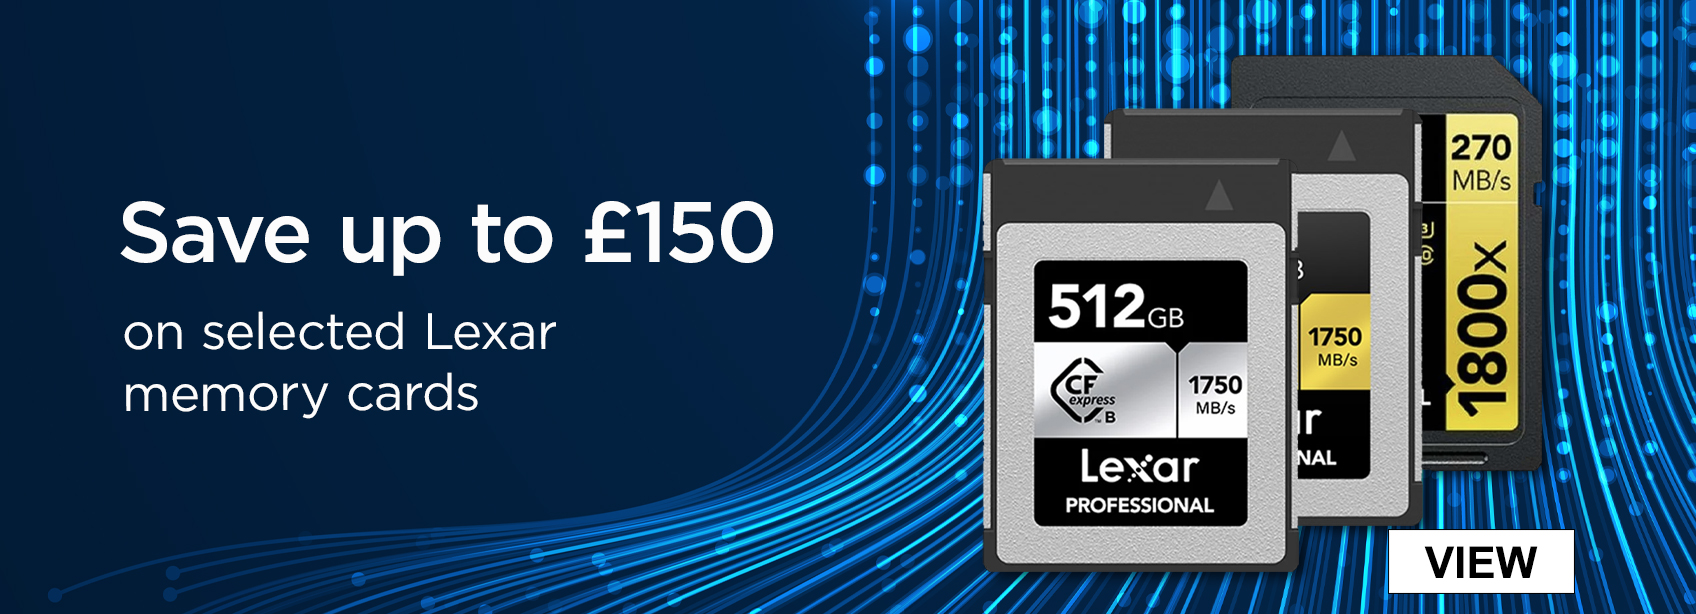 Save up to £150 on selected Lexar memory cards